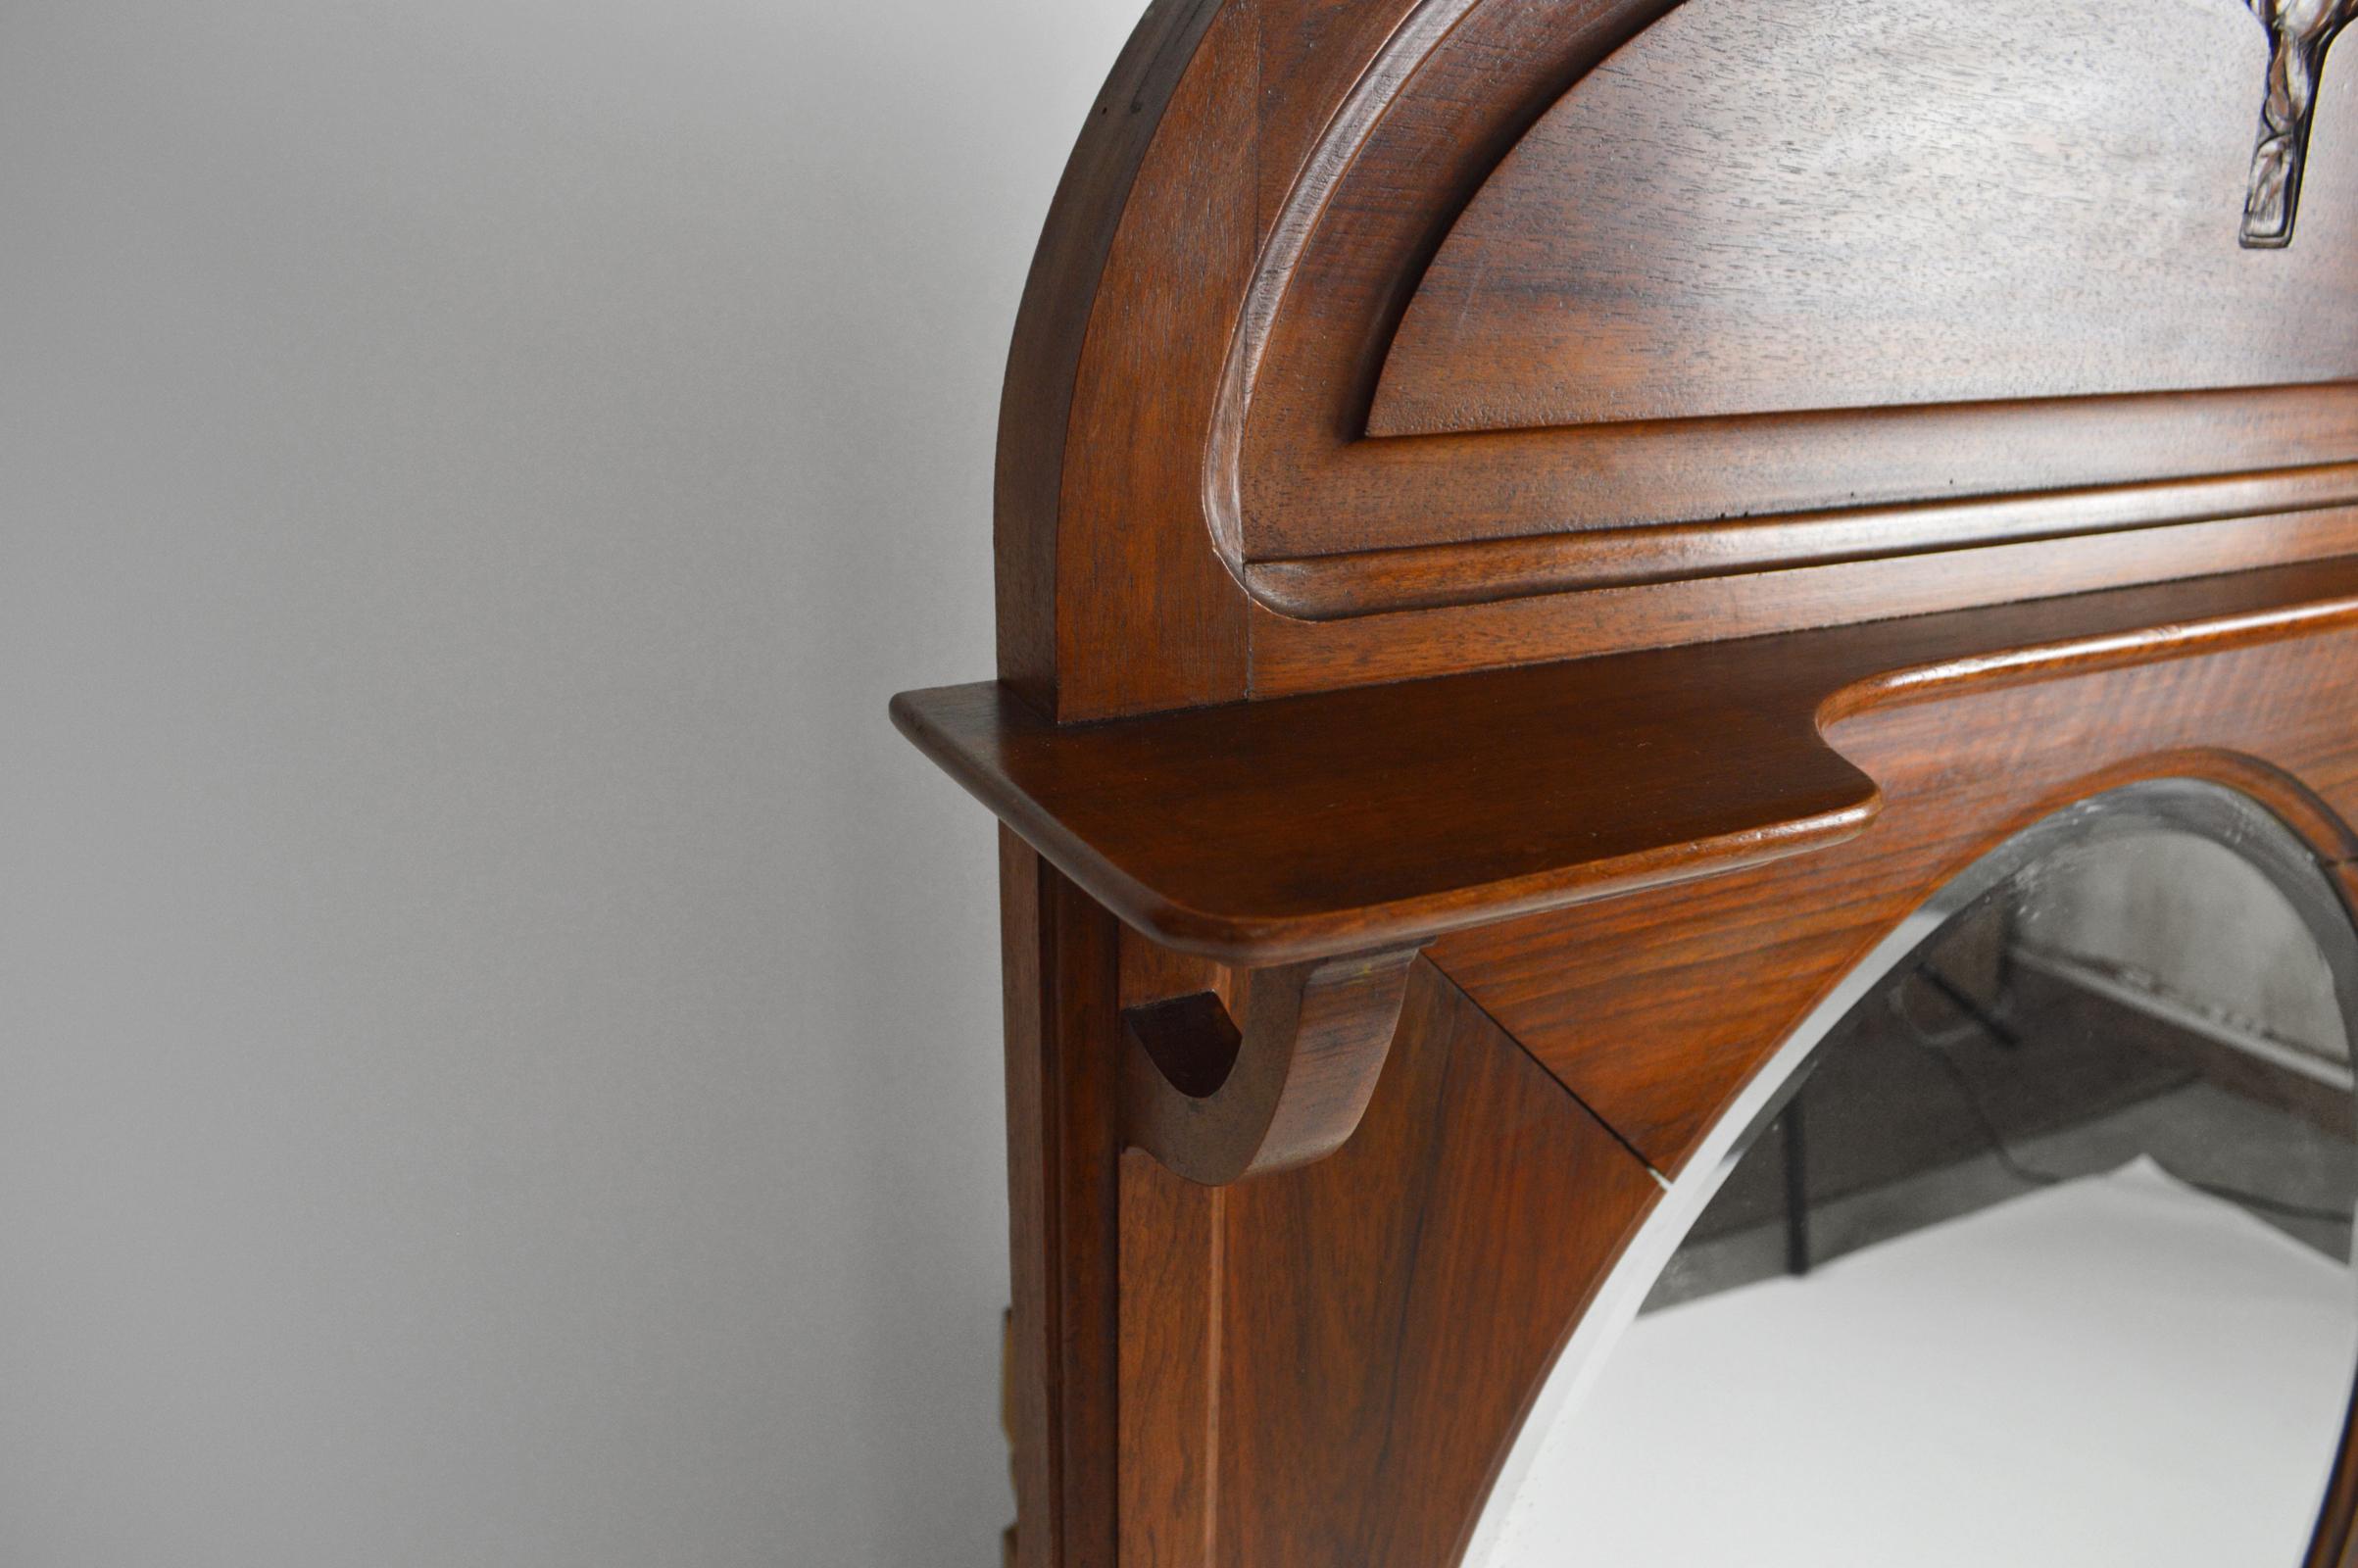 Oval Art Nouveau Fireplace Mirror in Carved Walnut, France, circa 1910 For Sale 2